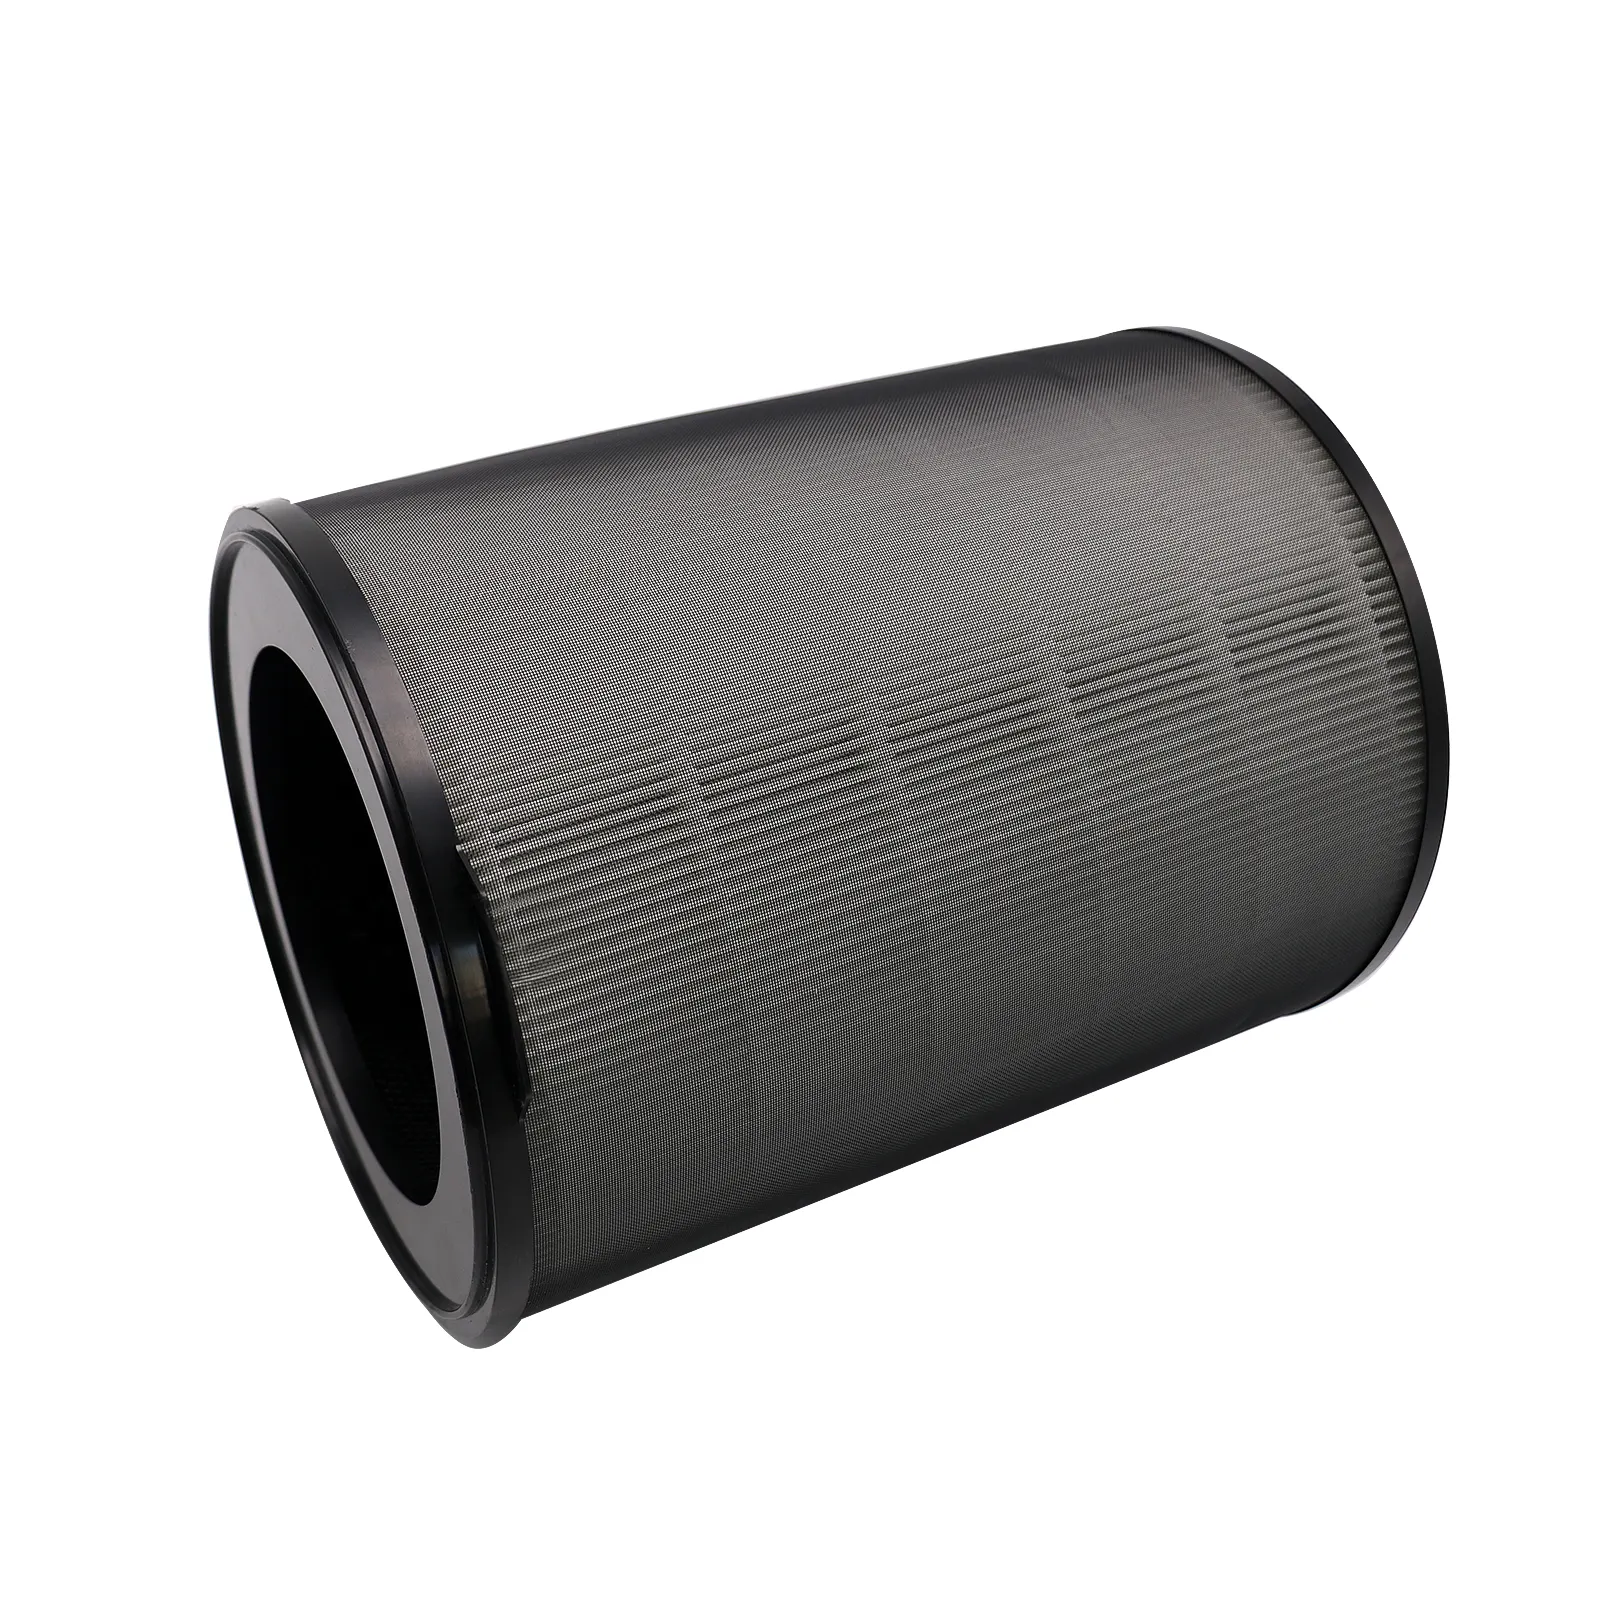 Carbon Hepa Filter For Winix Tower Q H13 Hepa Filter Cartridge Hepa Filter Activated Carbon Filter